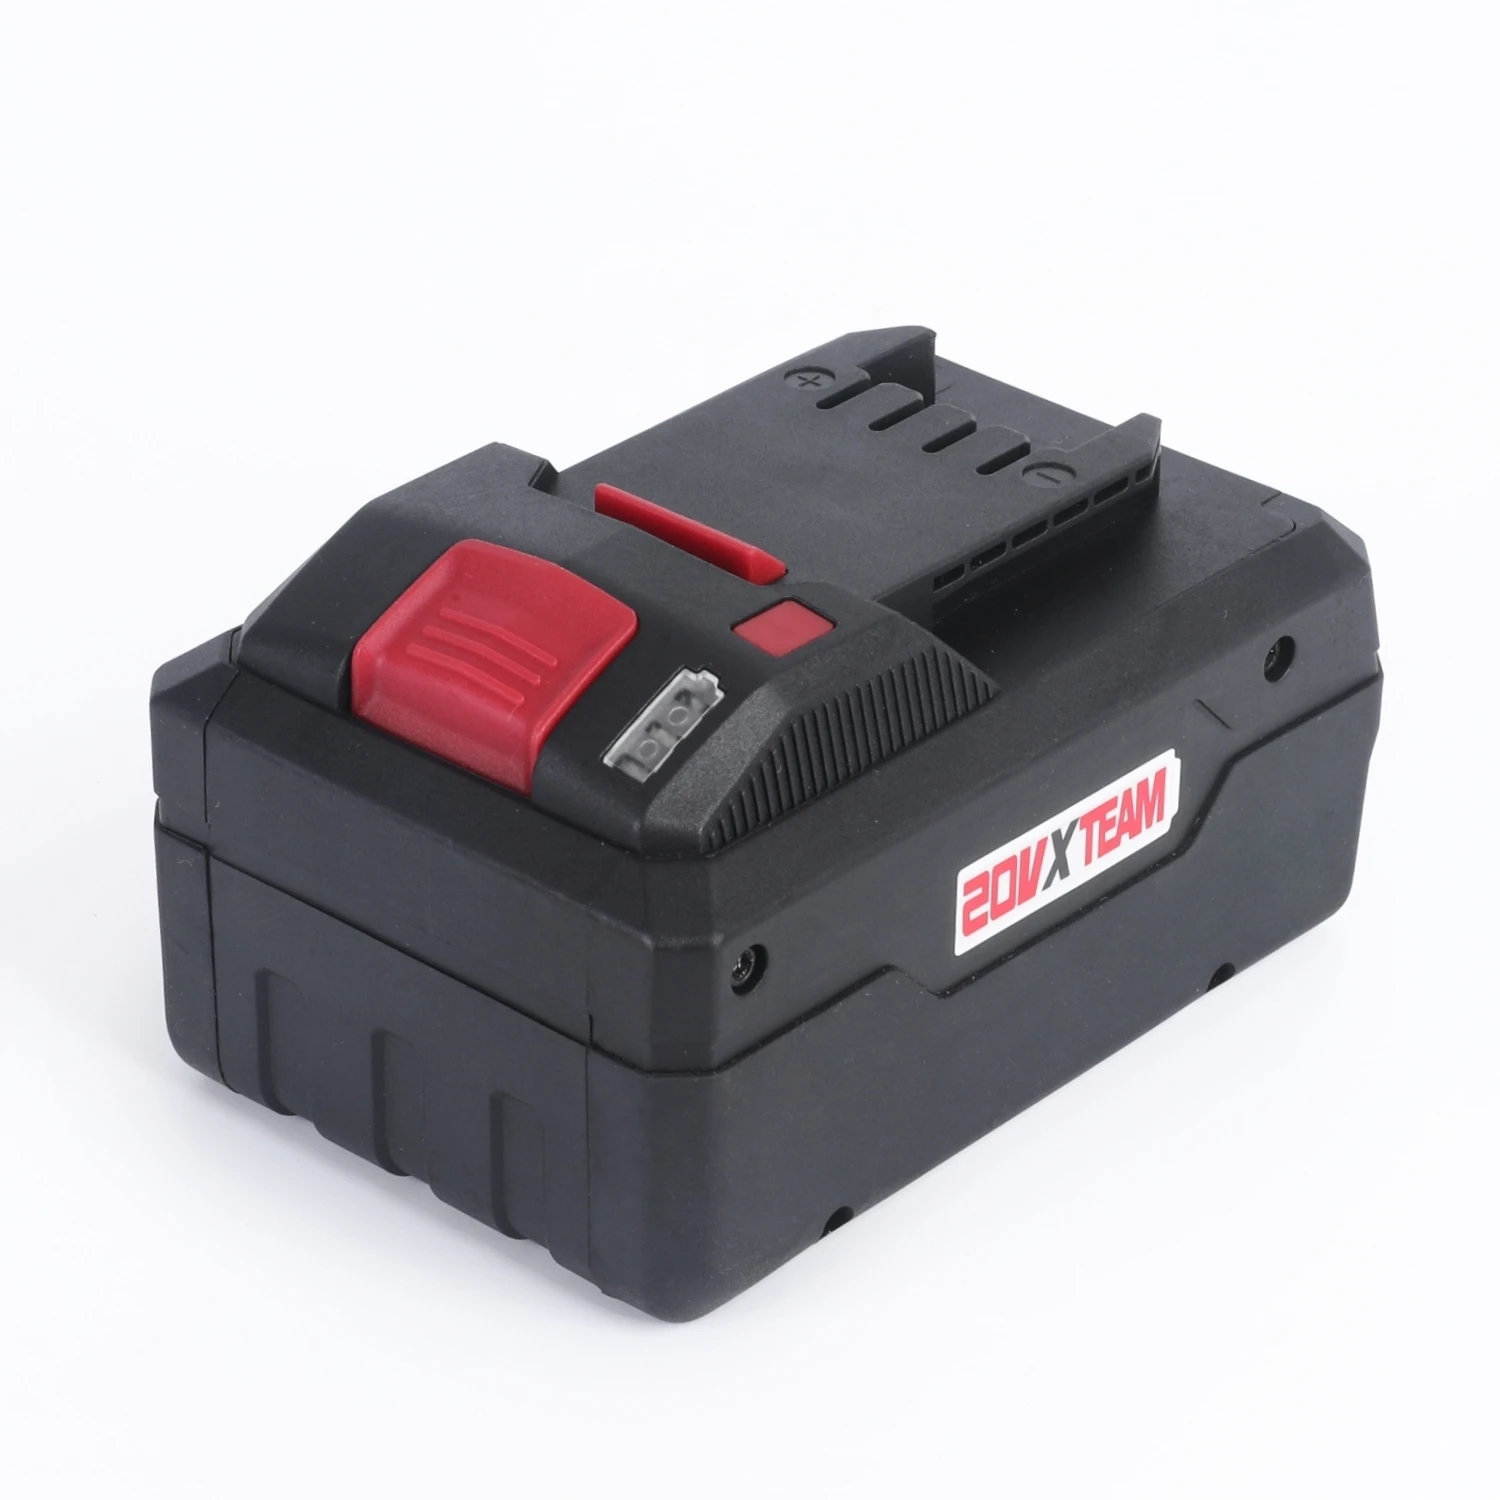 

20V 8Ah Performance Replacement Lithium-Ion Akku for Parkside X 20V Team Cordless Tools for PAP 20 B3, PAP 20 A3, PAPS 208 A1